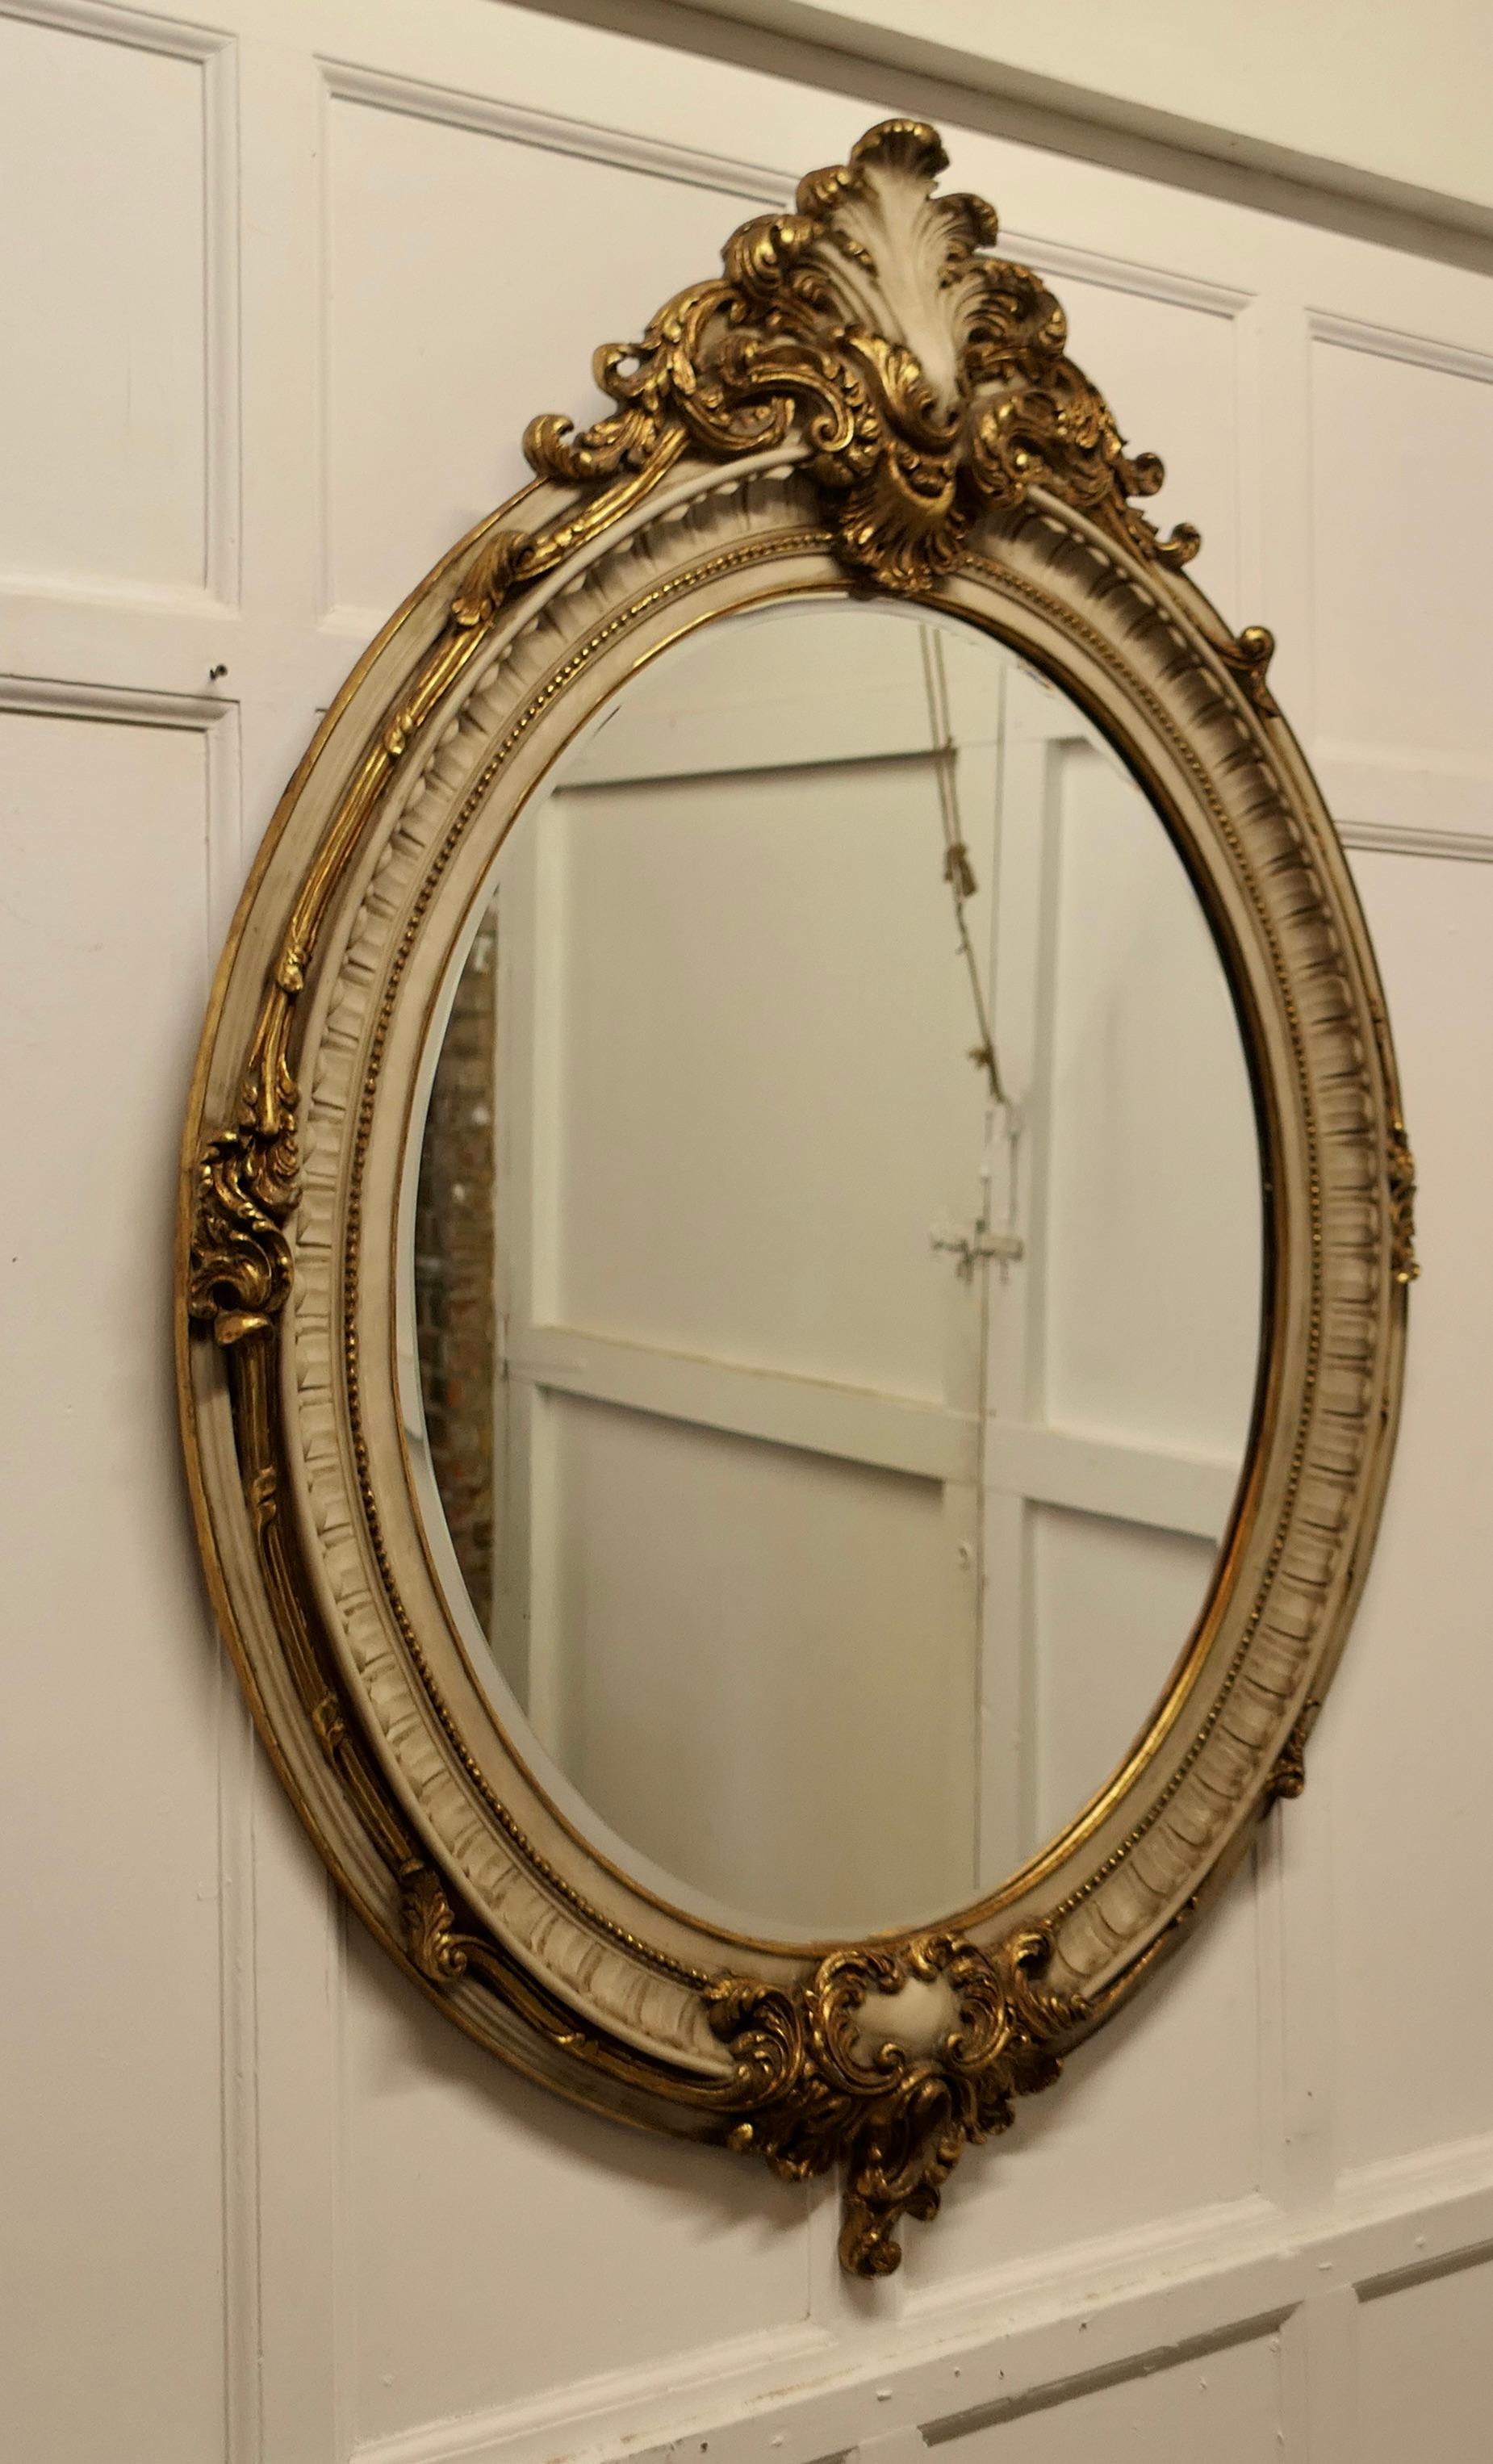 Very large French Rococo style oval gilt wall mirror.

The mirror has an impressive 6” wide gilt frame in the Rococo Style, it is made in a simulated marble decorated with very large shells and scrolls in aged gilt
The oval frame is in good